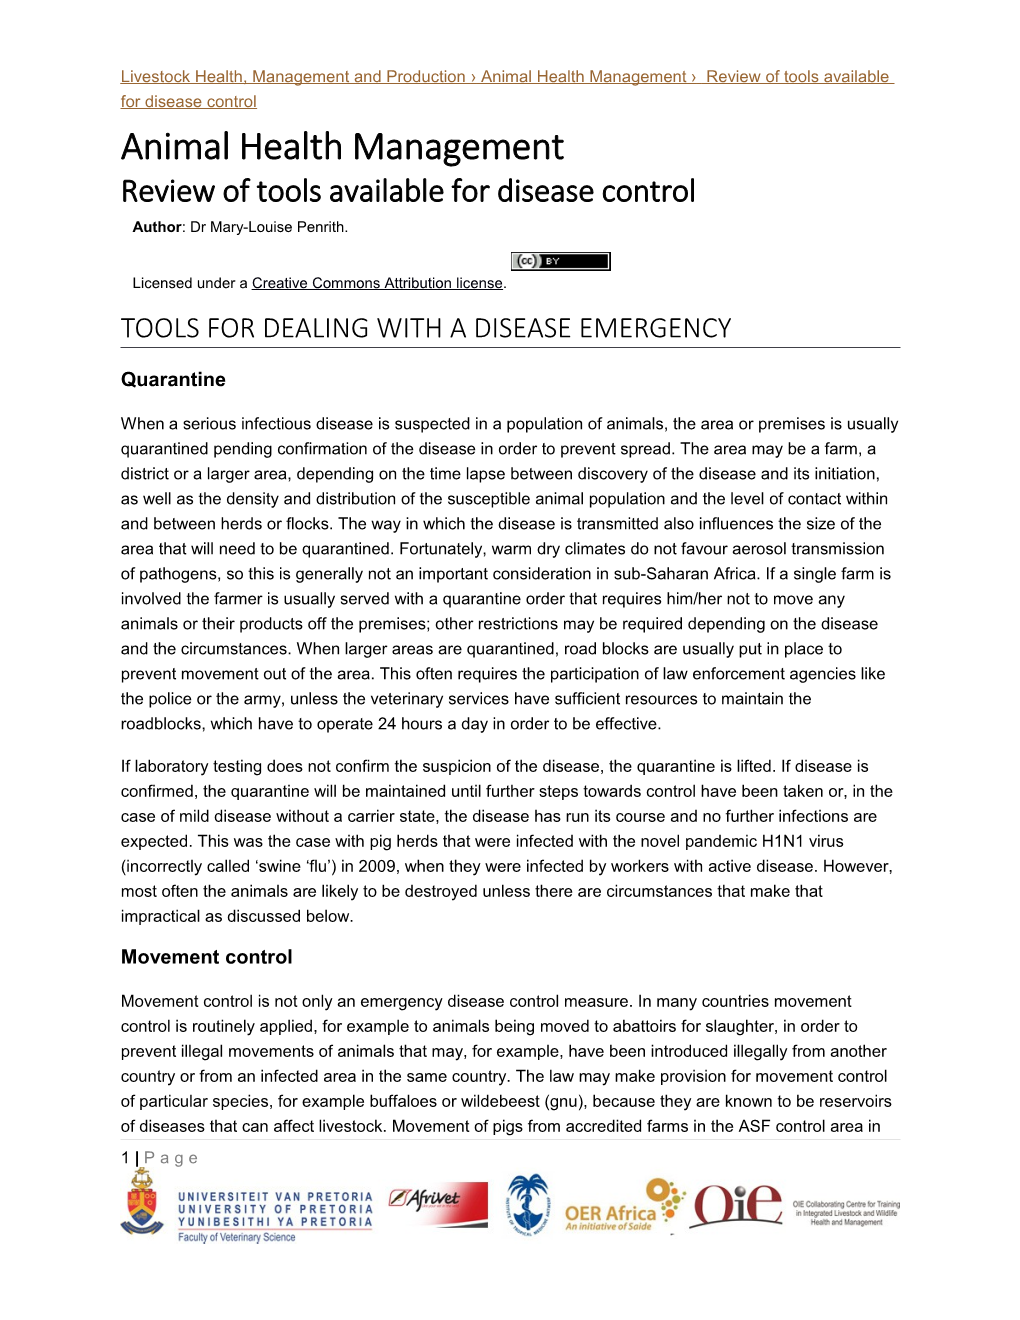 Animal Health Management Review of Tools Available for Disease Control